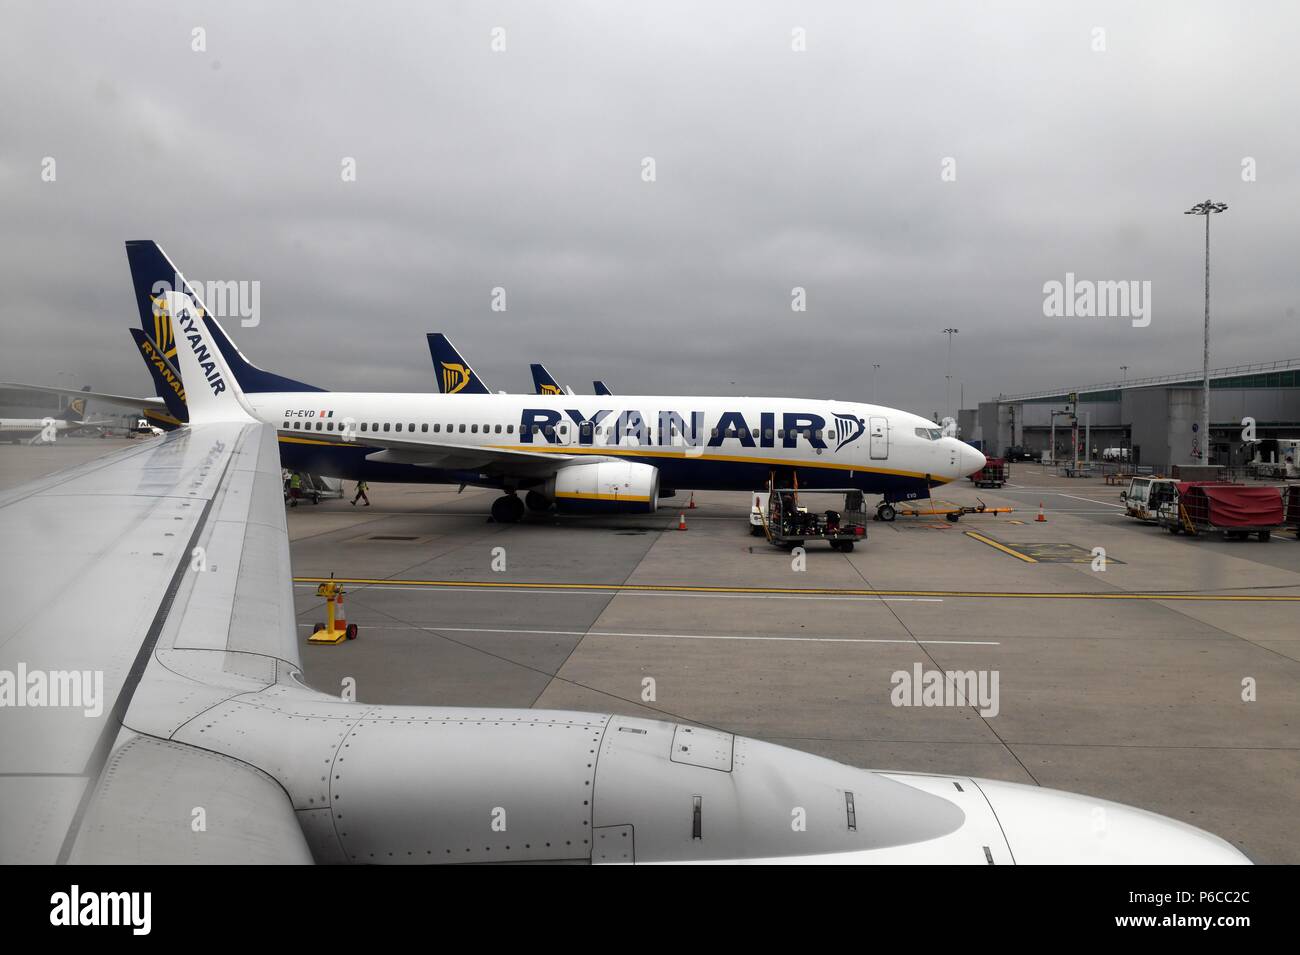 London, United Kingdom. Ryanair at Stansted Airport. Ryanair aeroplanes are loaded with passengers baggage by baggage handlers at Stansted Airport. Photo By Andrew Parsons/ Parsons Media Ltd Stock Photo